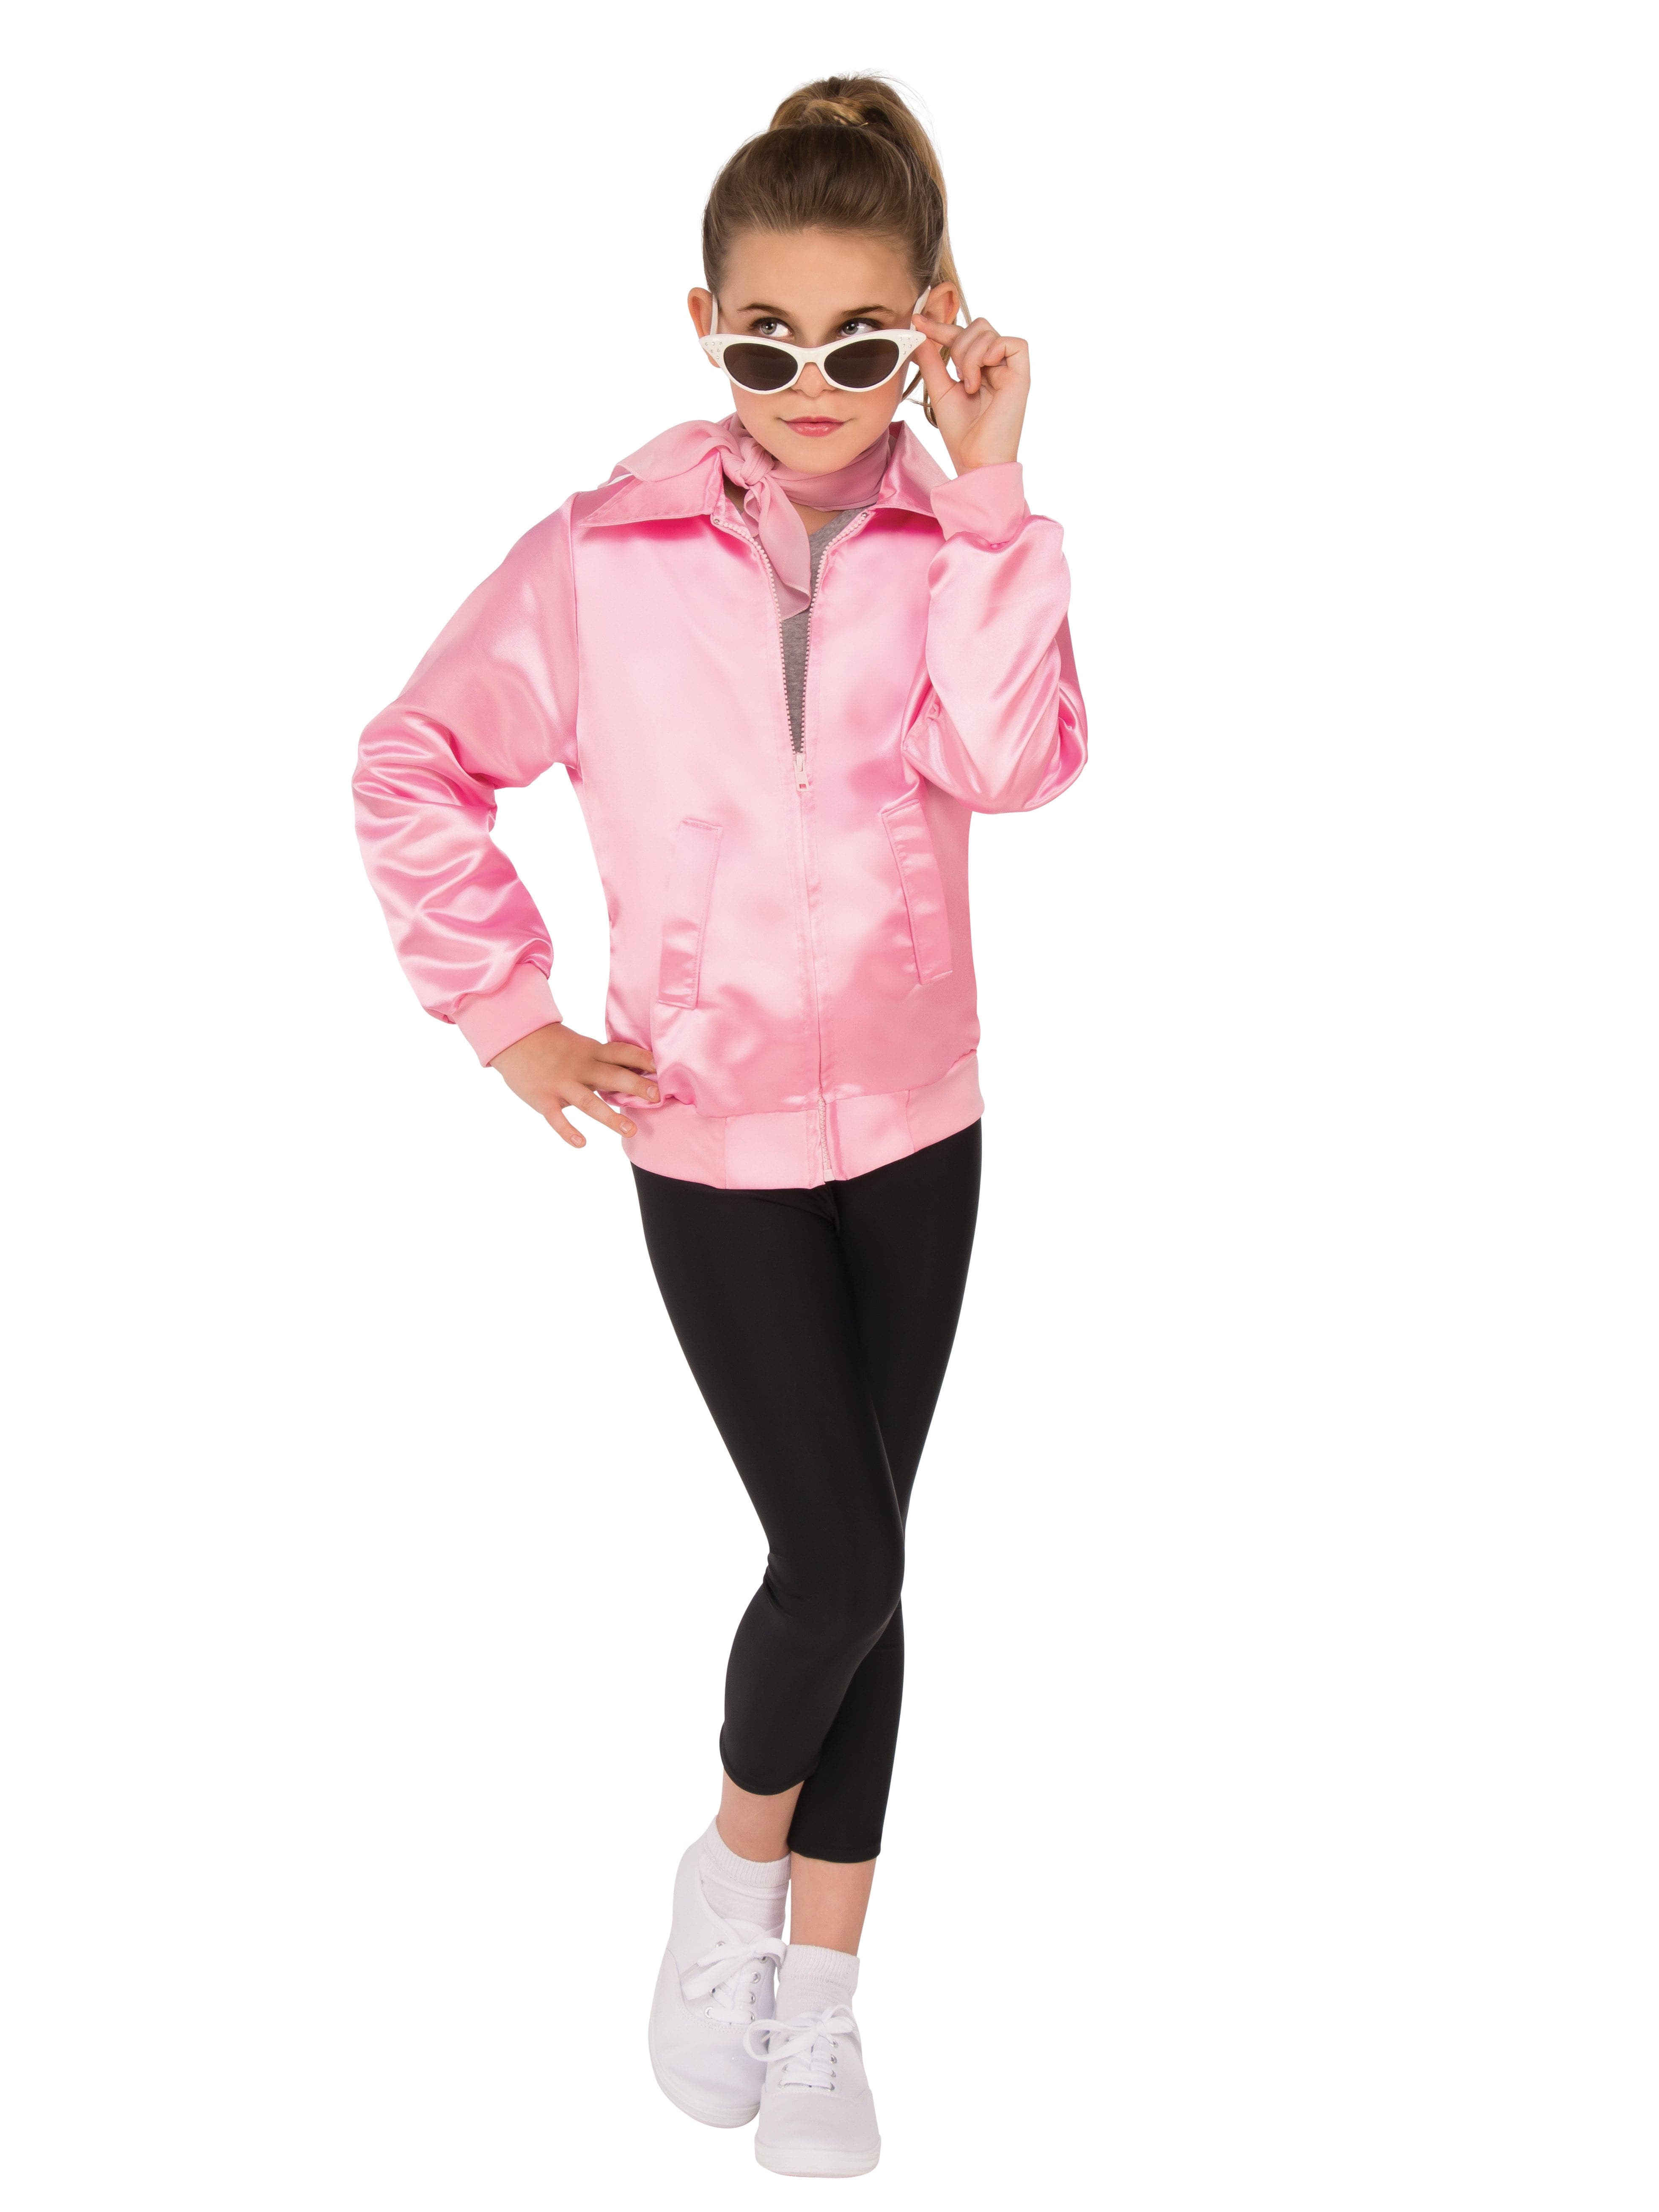 Kids Grease Jacket - costumes.com